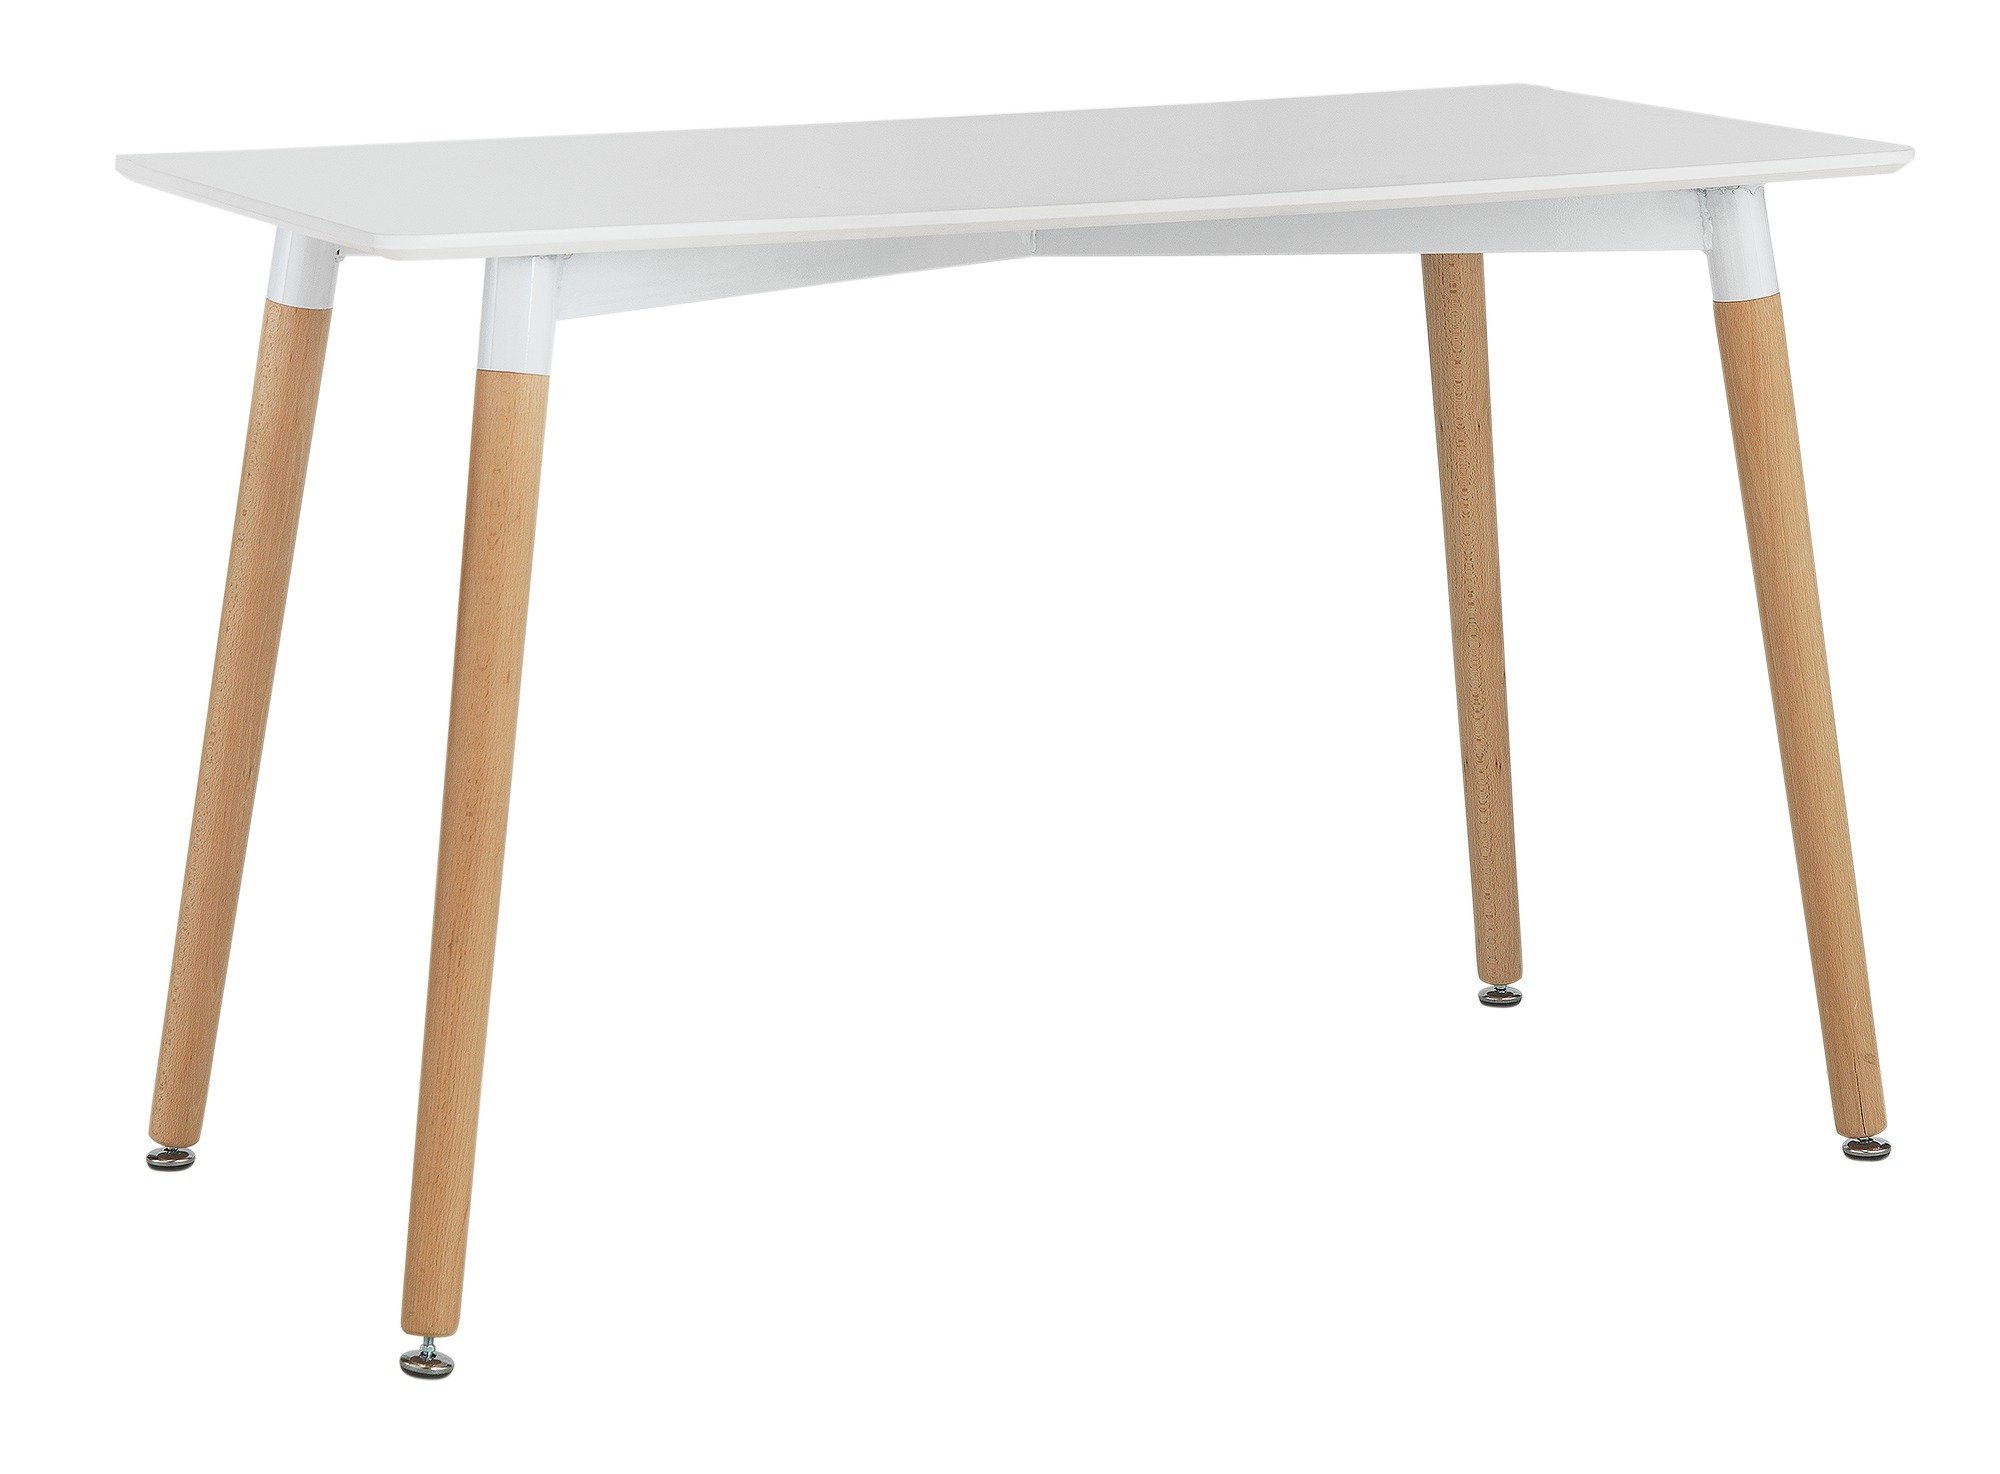 Argos Home Charlie Solid Beech 4 Seater Dining Table - White